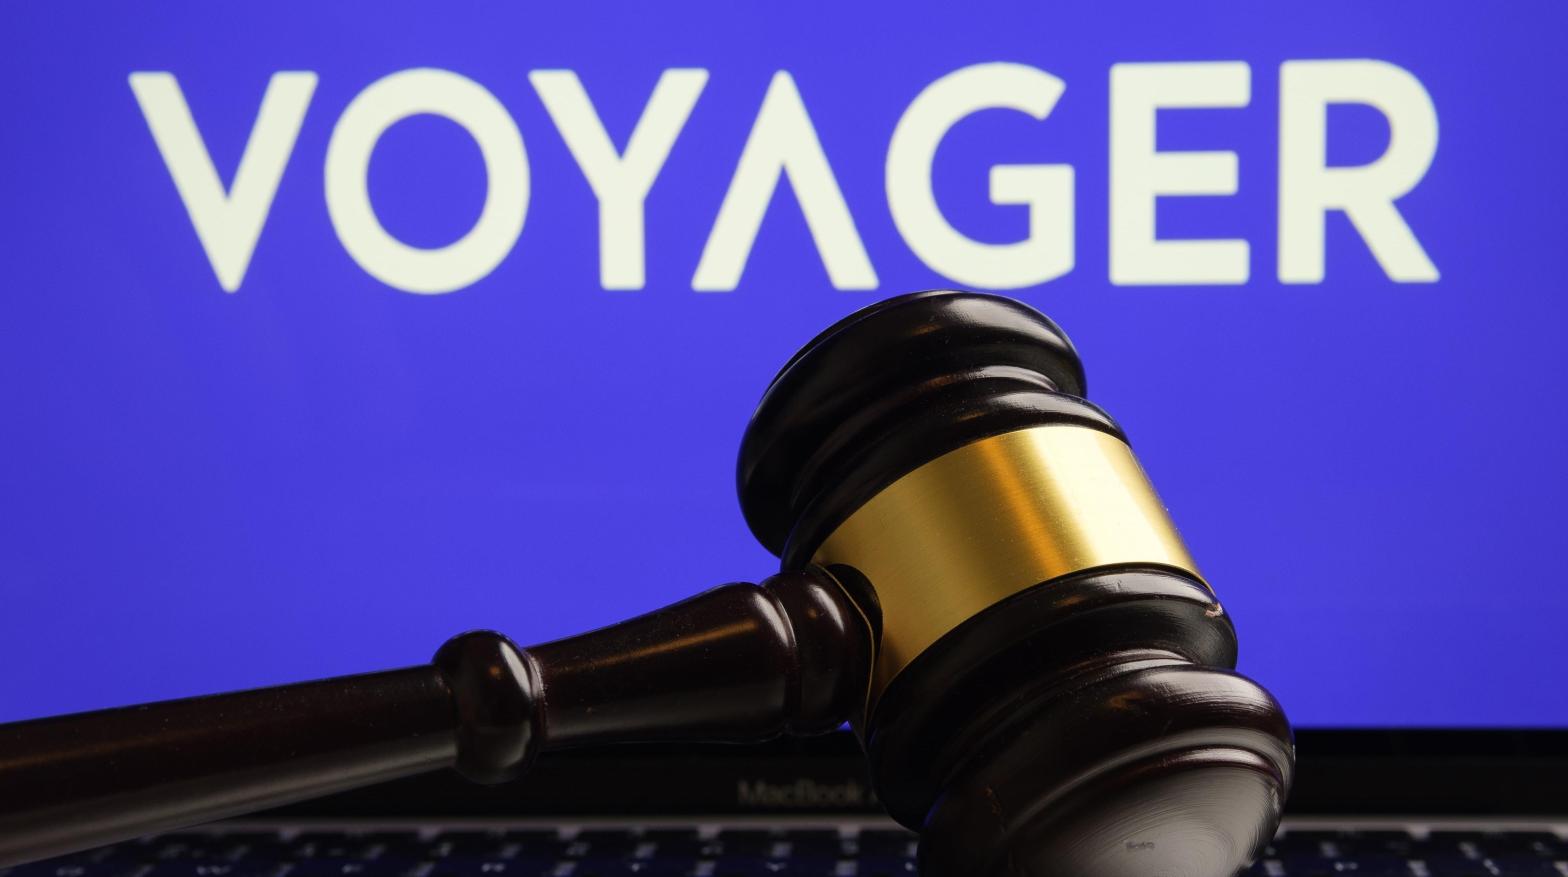 Voyager had been hoping for a quick buyout of its $US1 ($1).3 ($2) billion in assets. Now it's stuck trying to give creditors back their locked funds. (Image: mundissima, Shutterstock)